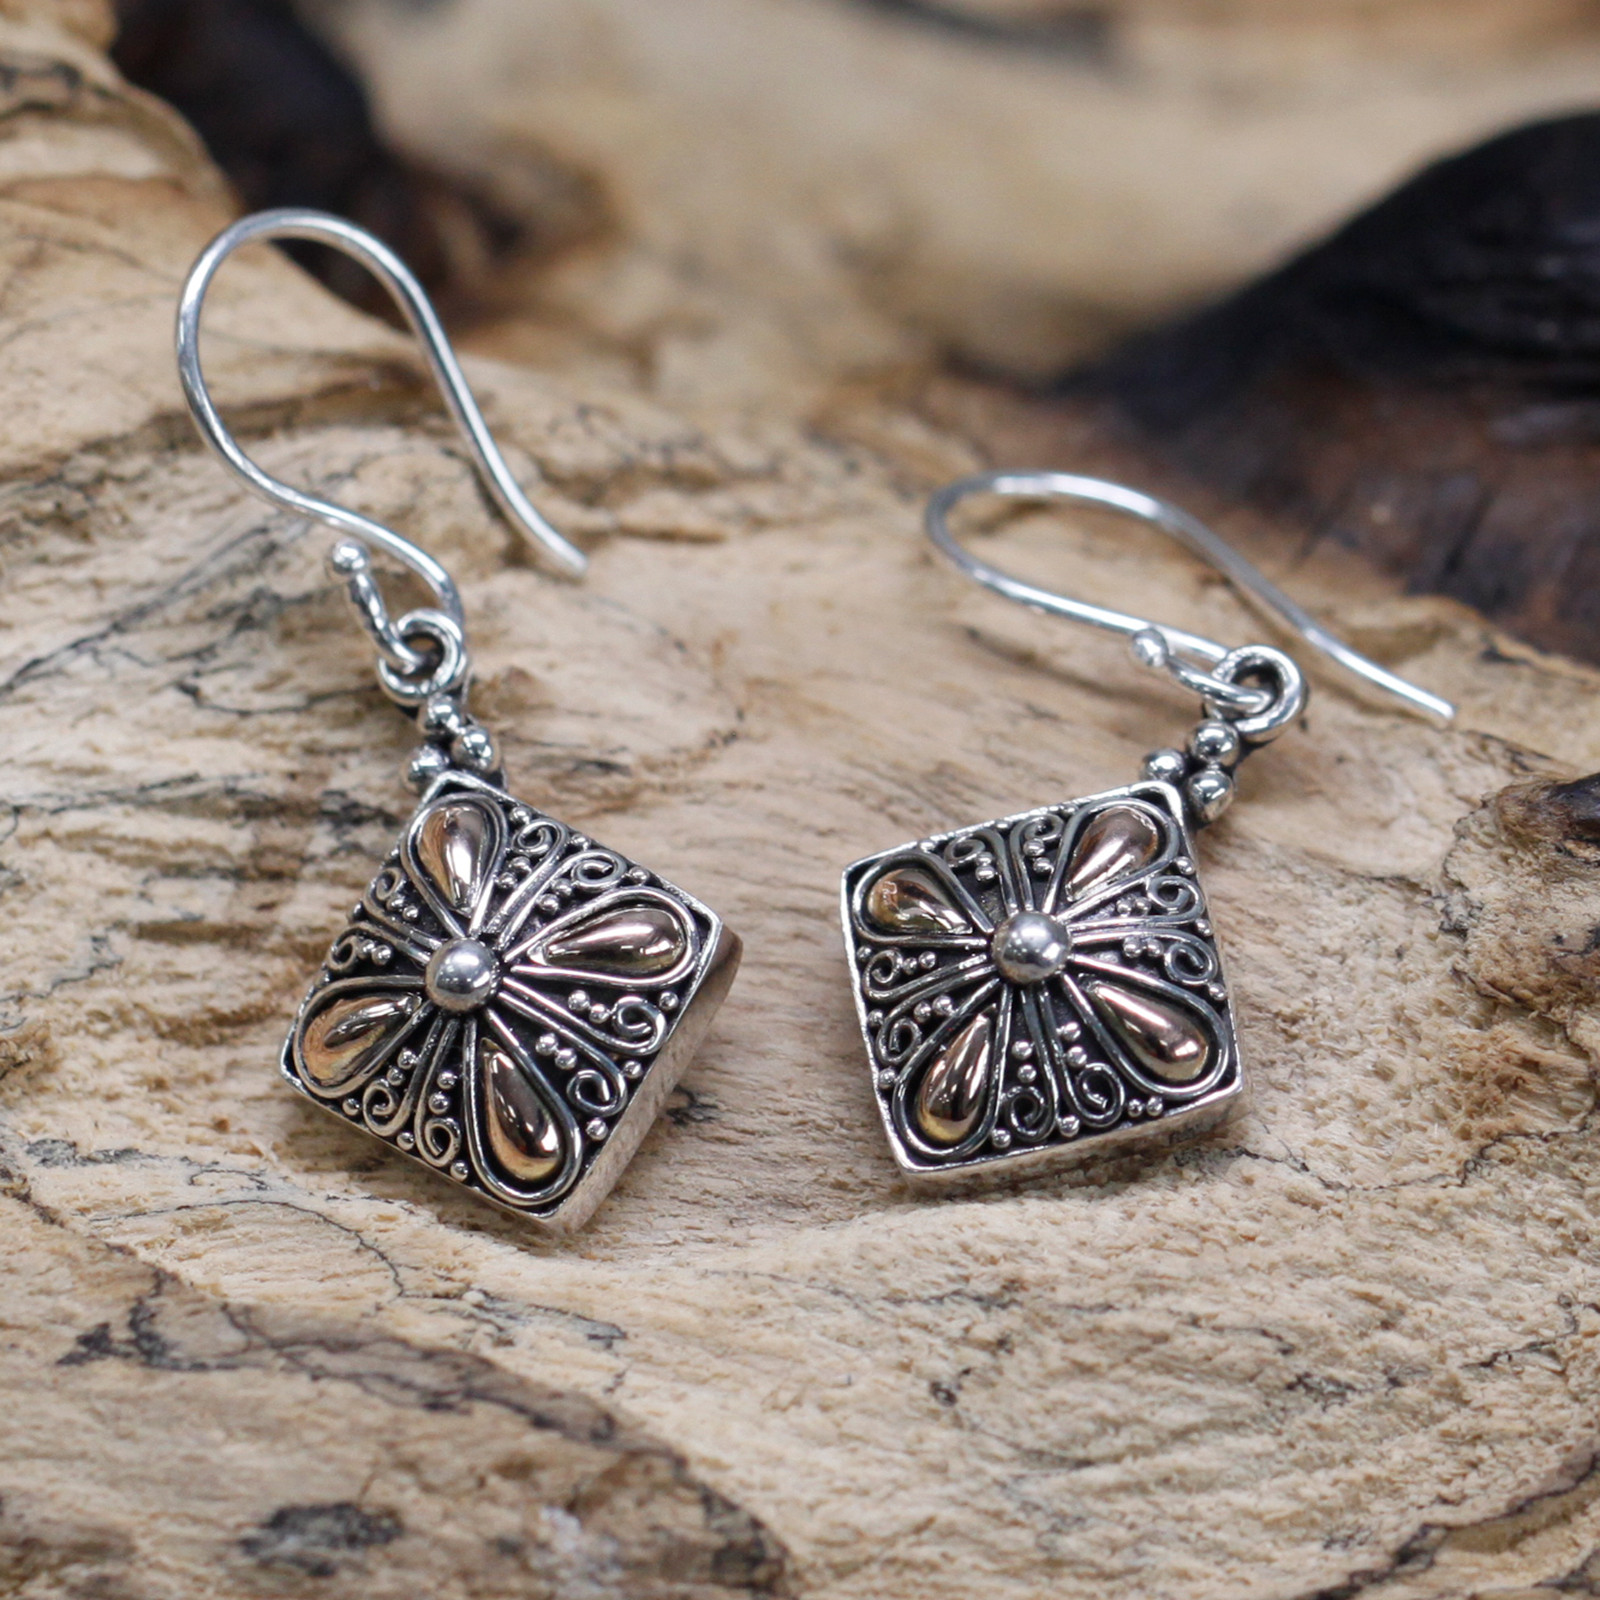 Silver & Gold Earrings - Square Drop